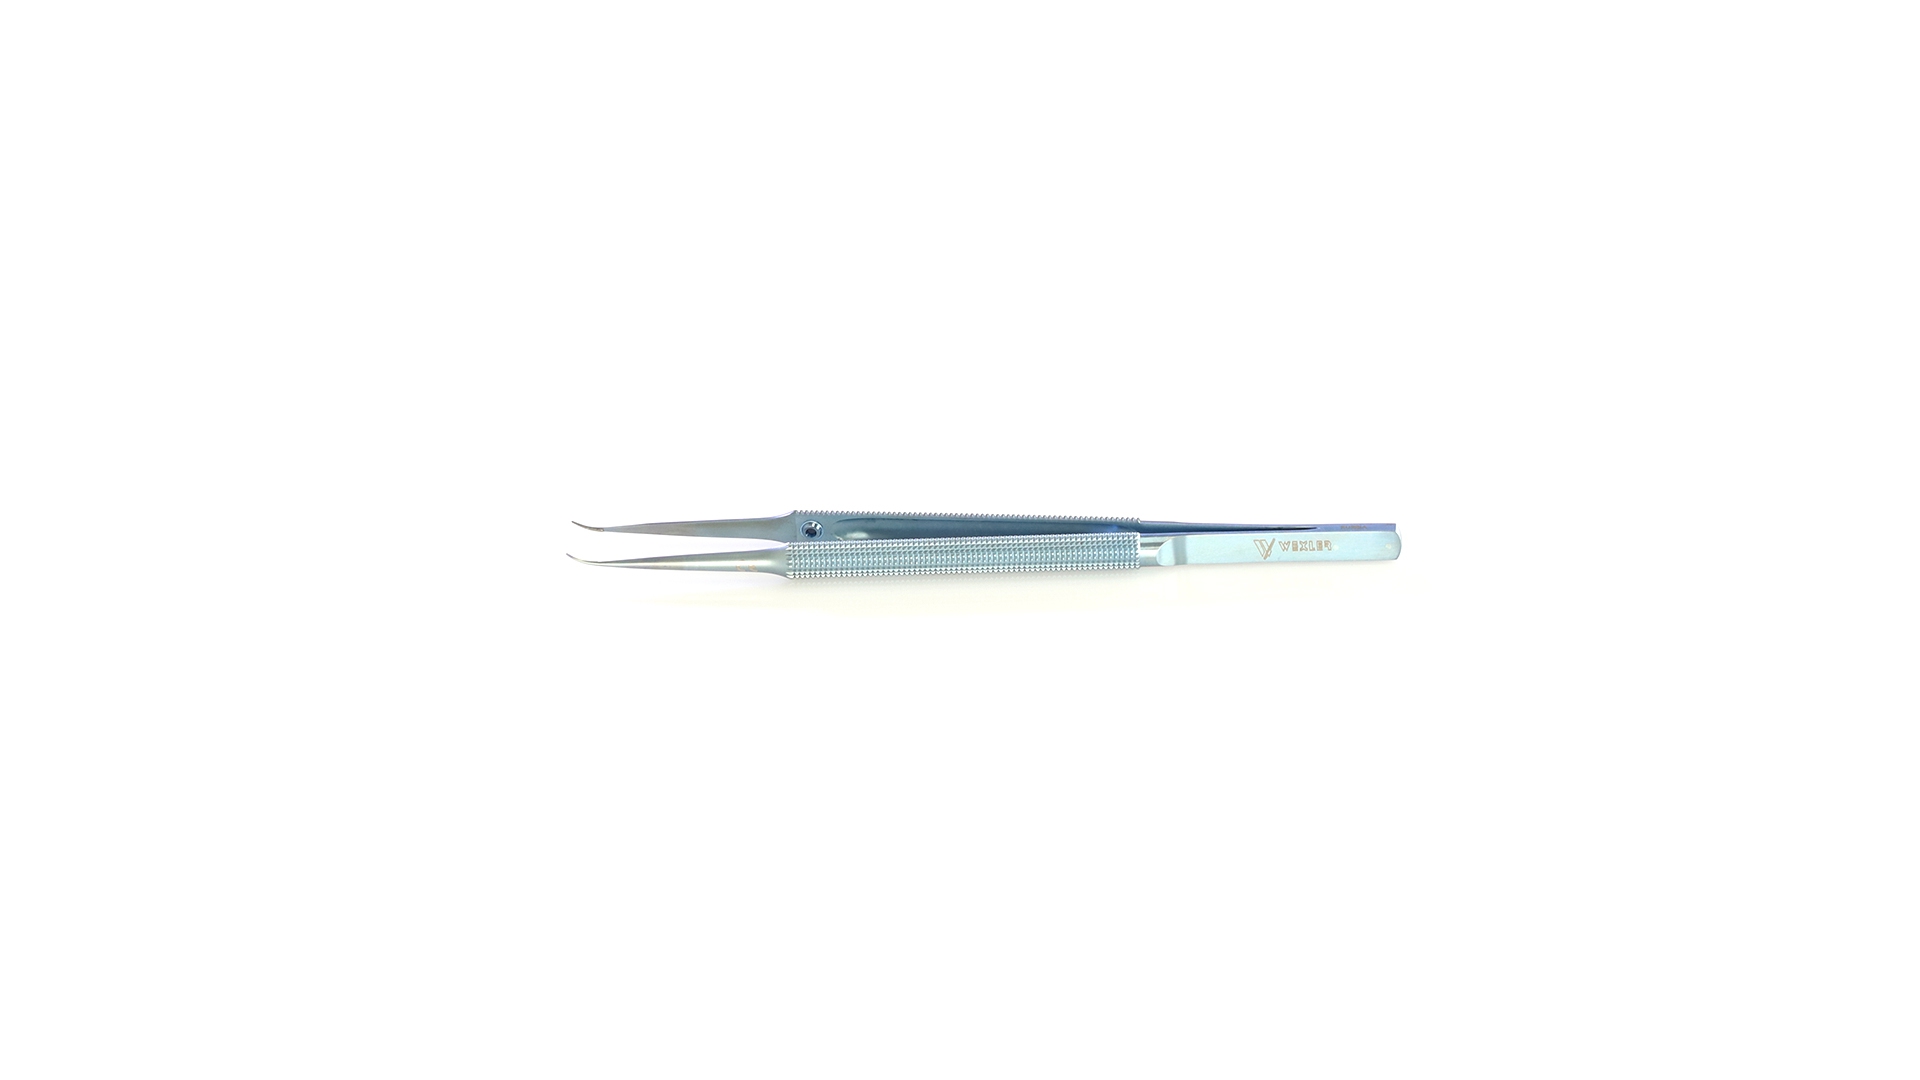 Micro Forceps - Curved 0.4mm TC Coated concave/convex tips